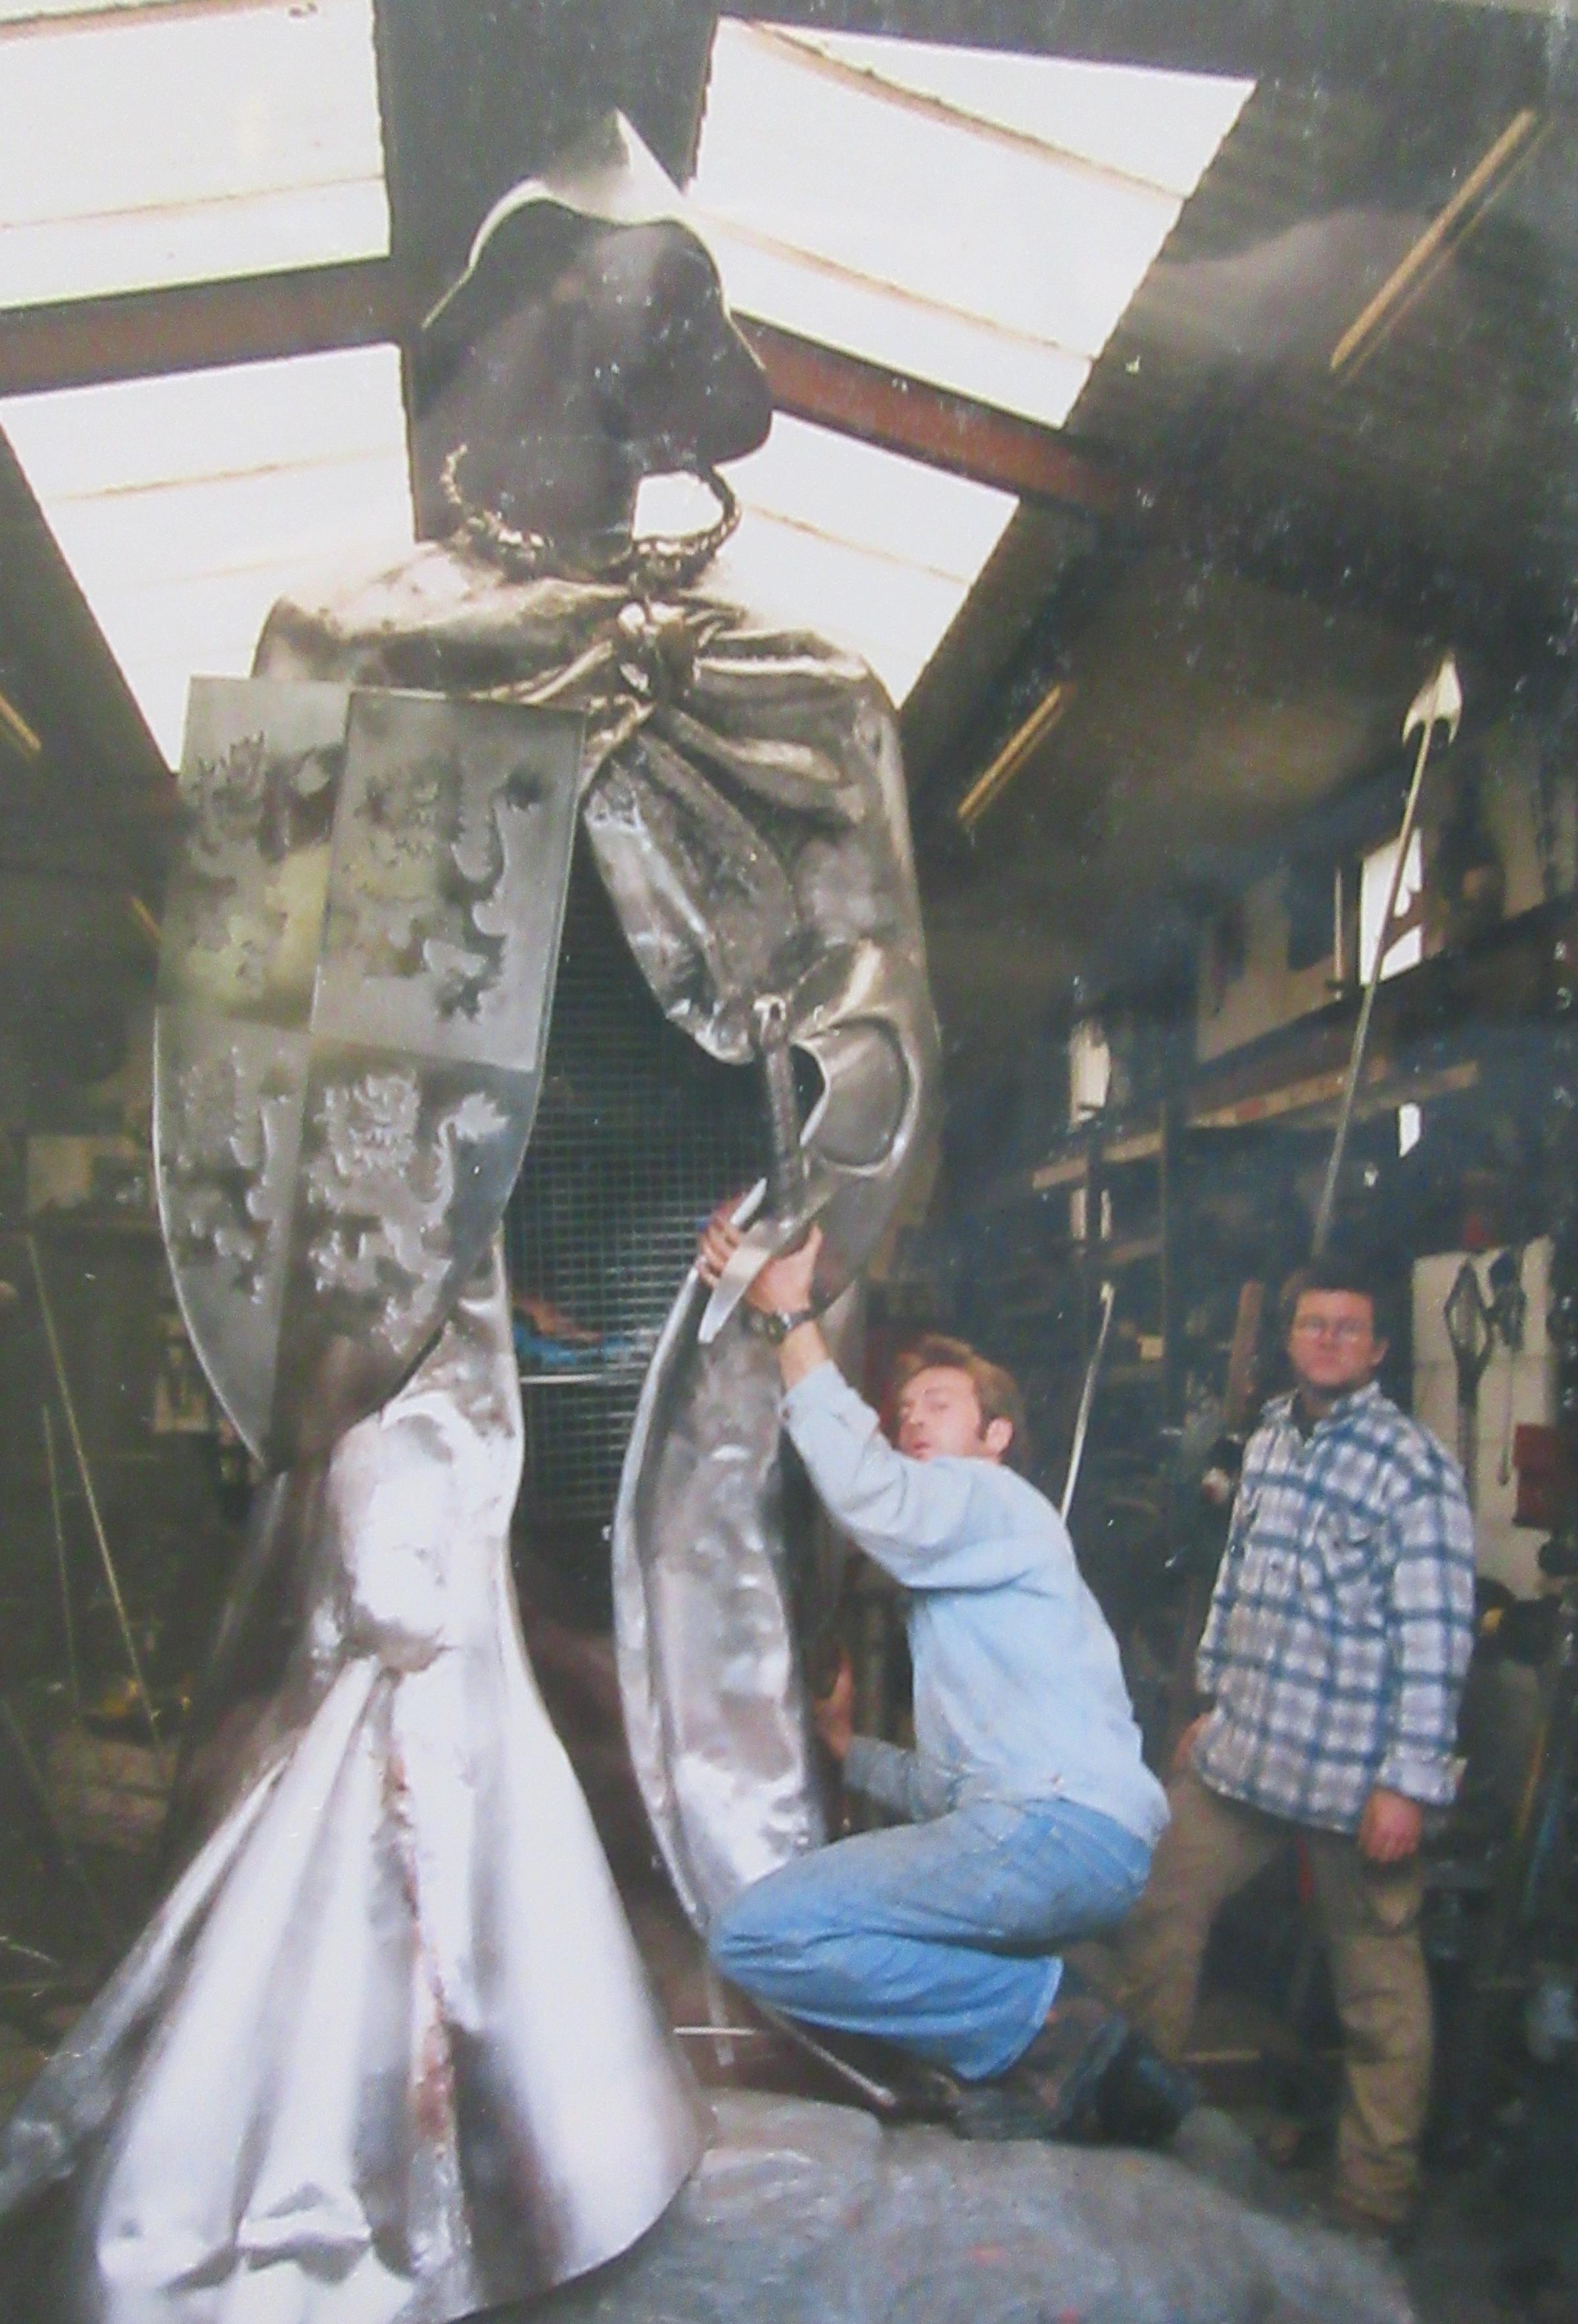 The statue in the workshop of Toby and Gideon Petersen